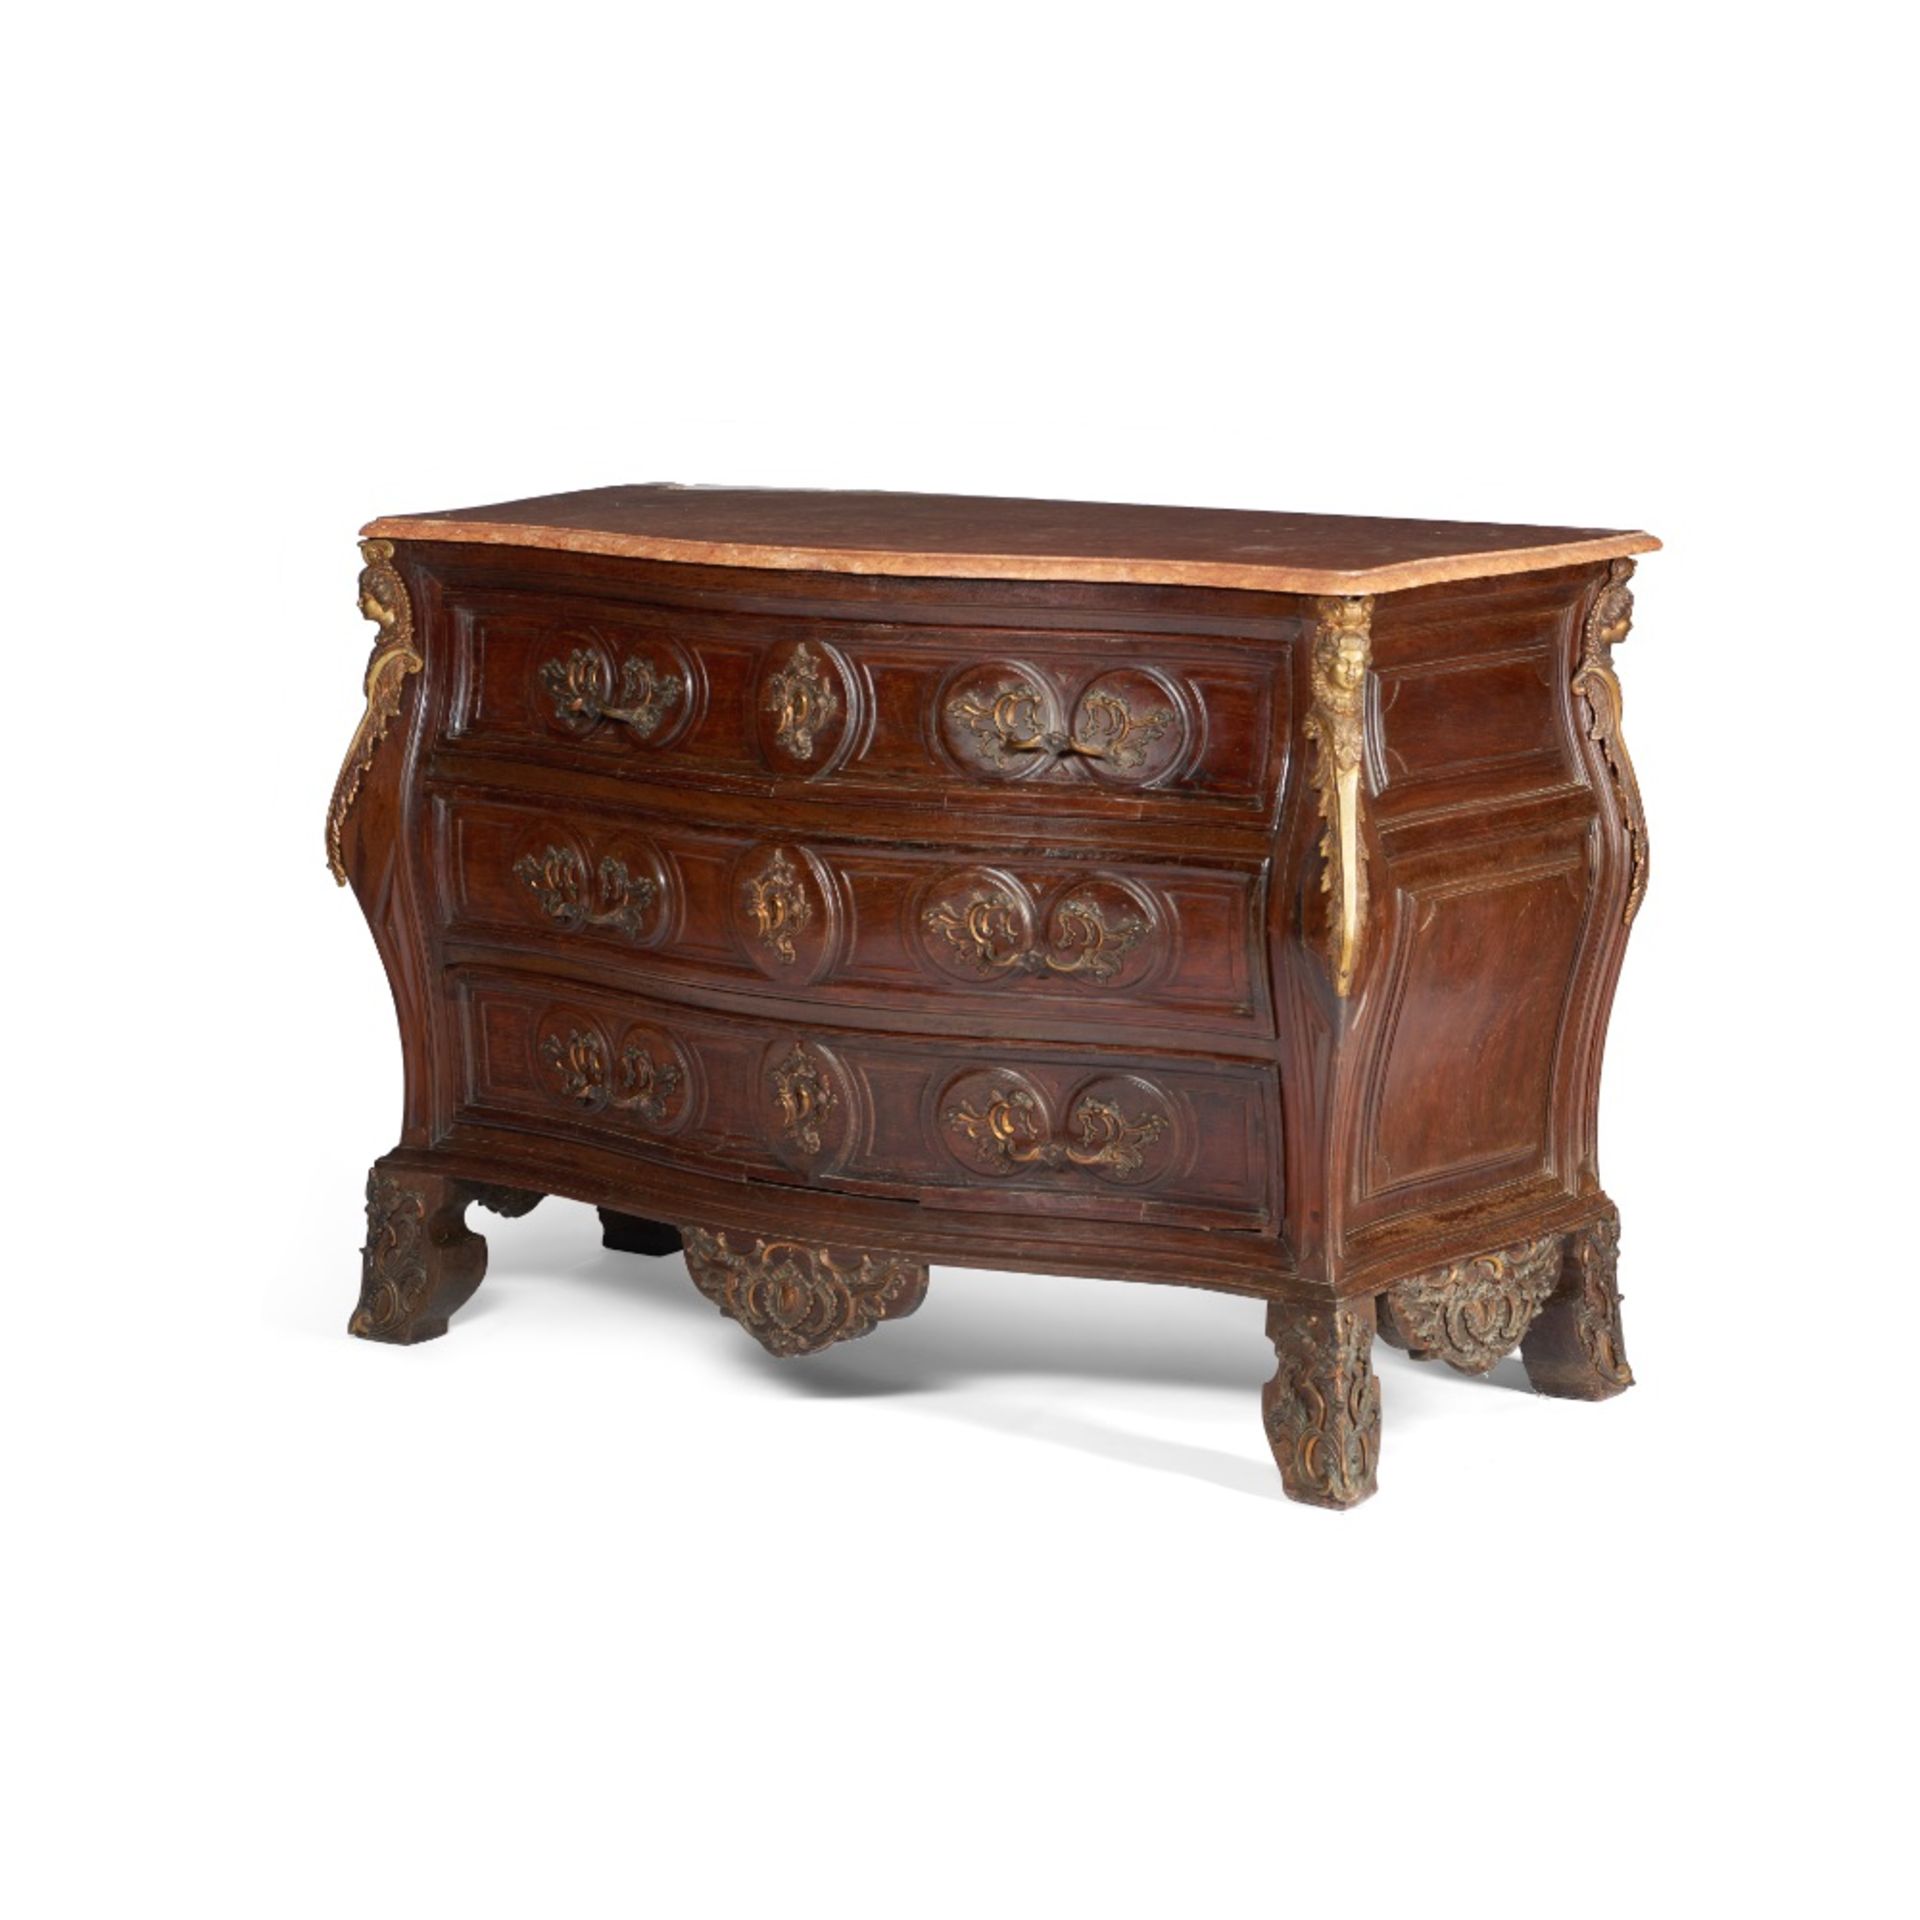 A French Regency style chest of drawers